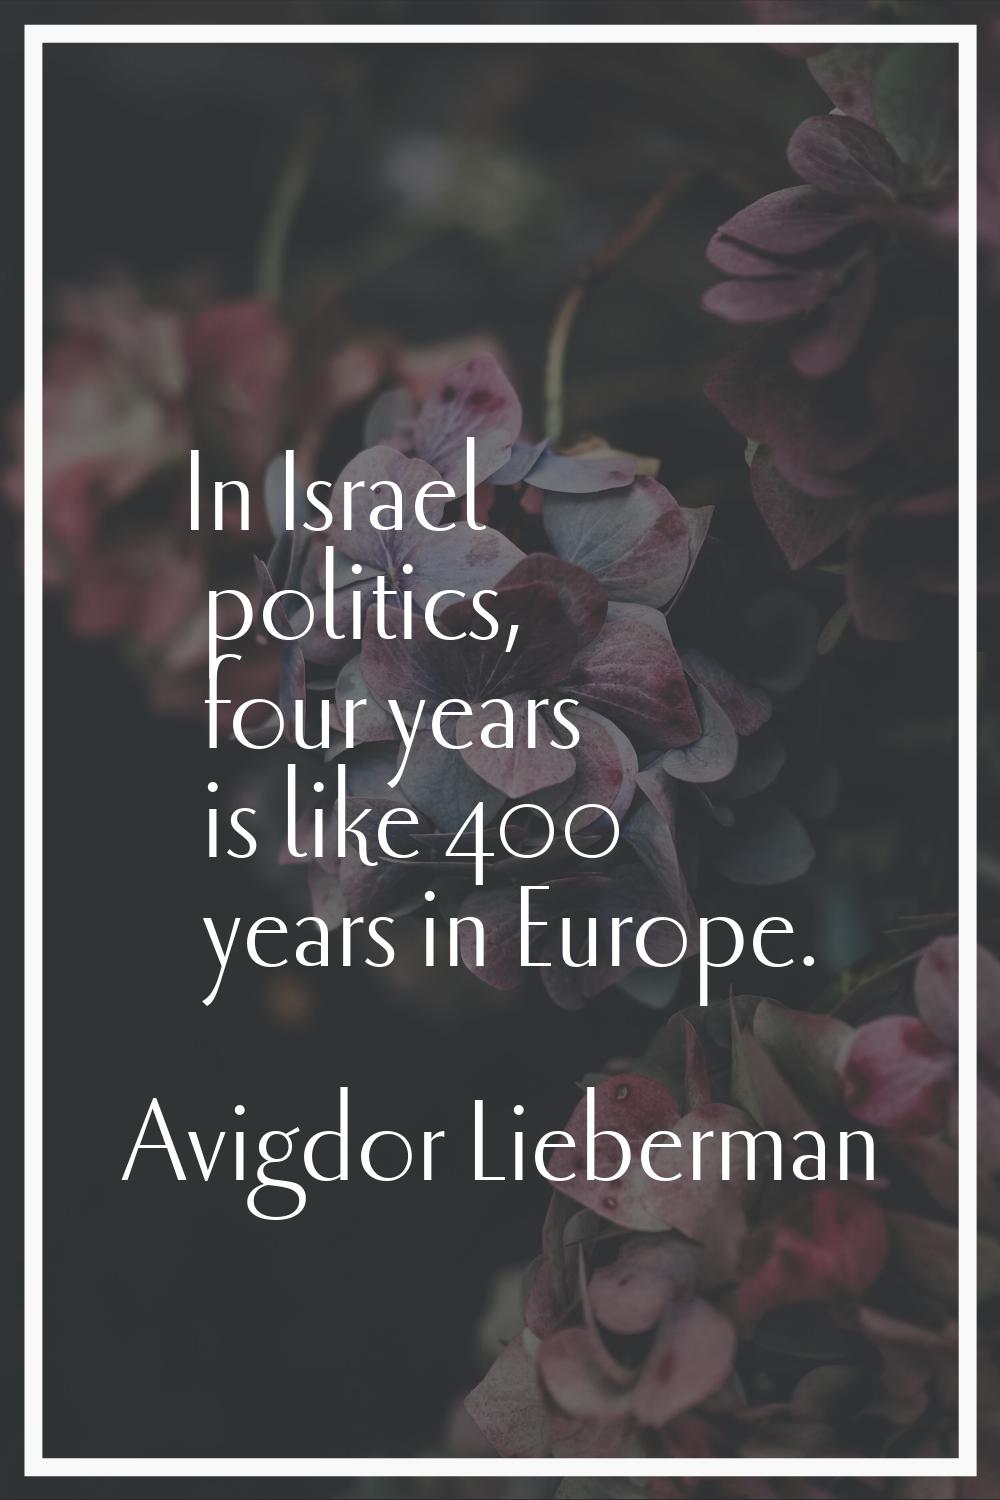 In Israel politics, four years is like 400 years in Europe.